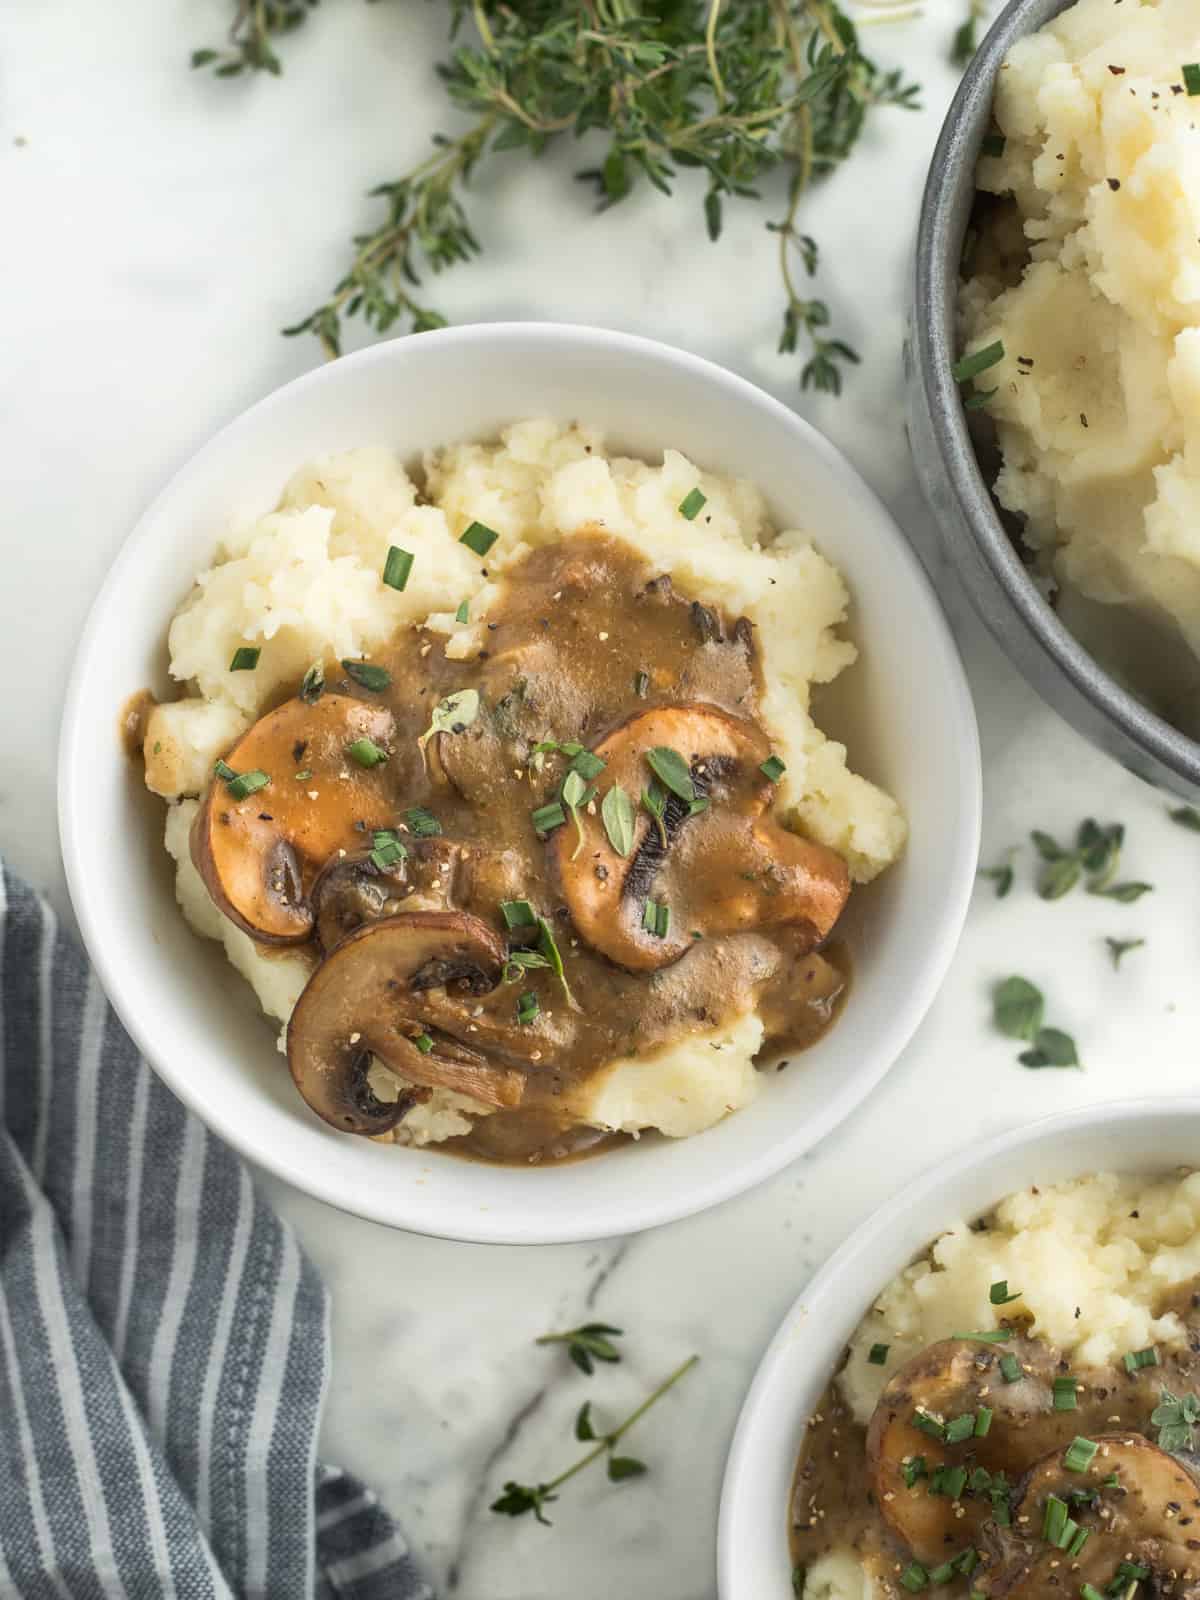 Bowl of mashed potatoes covered in mushroom gravy.